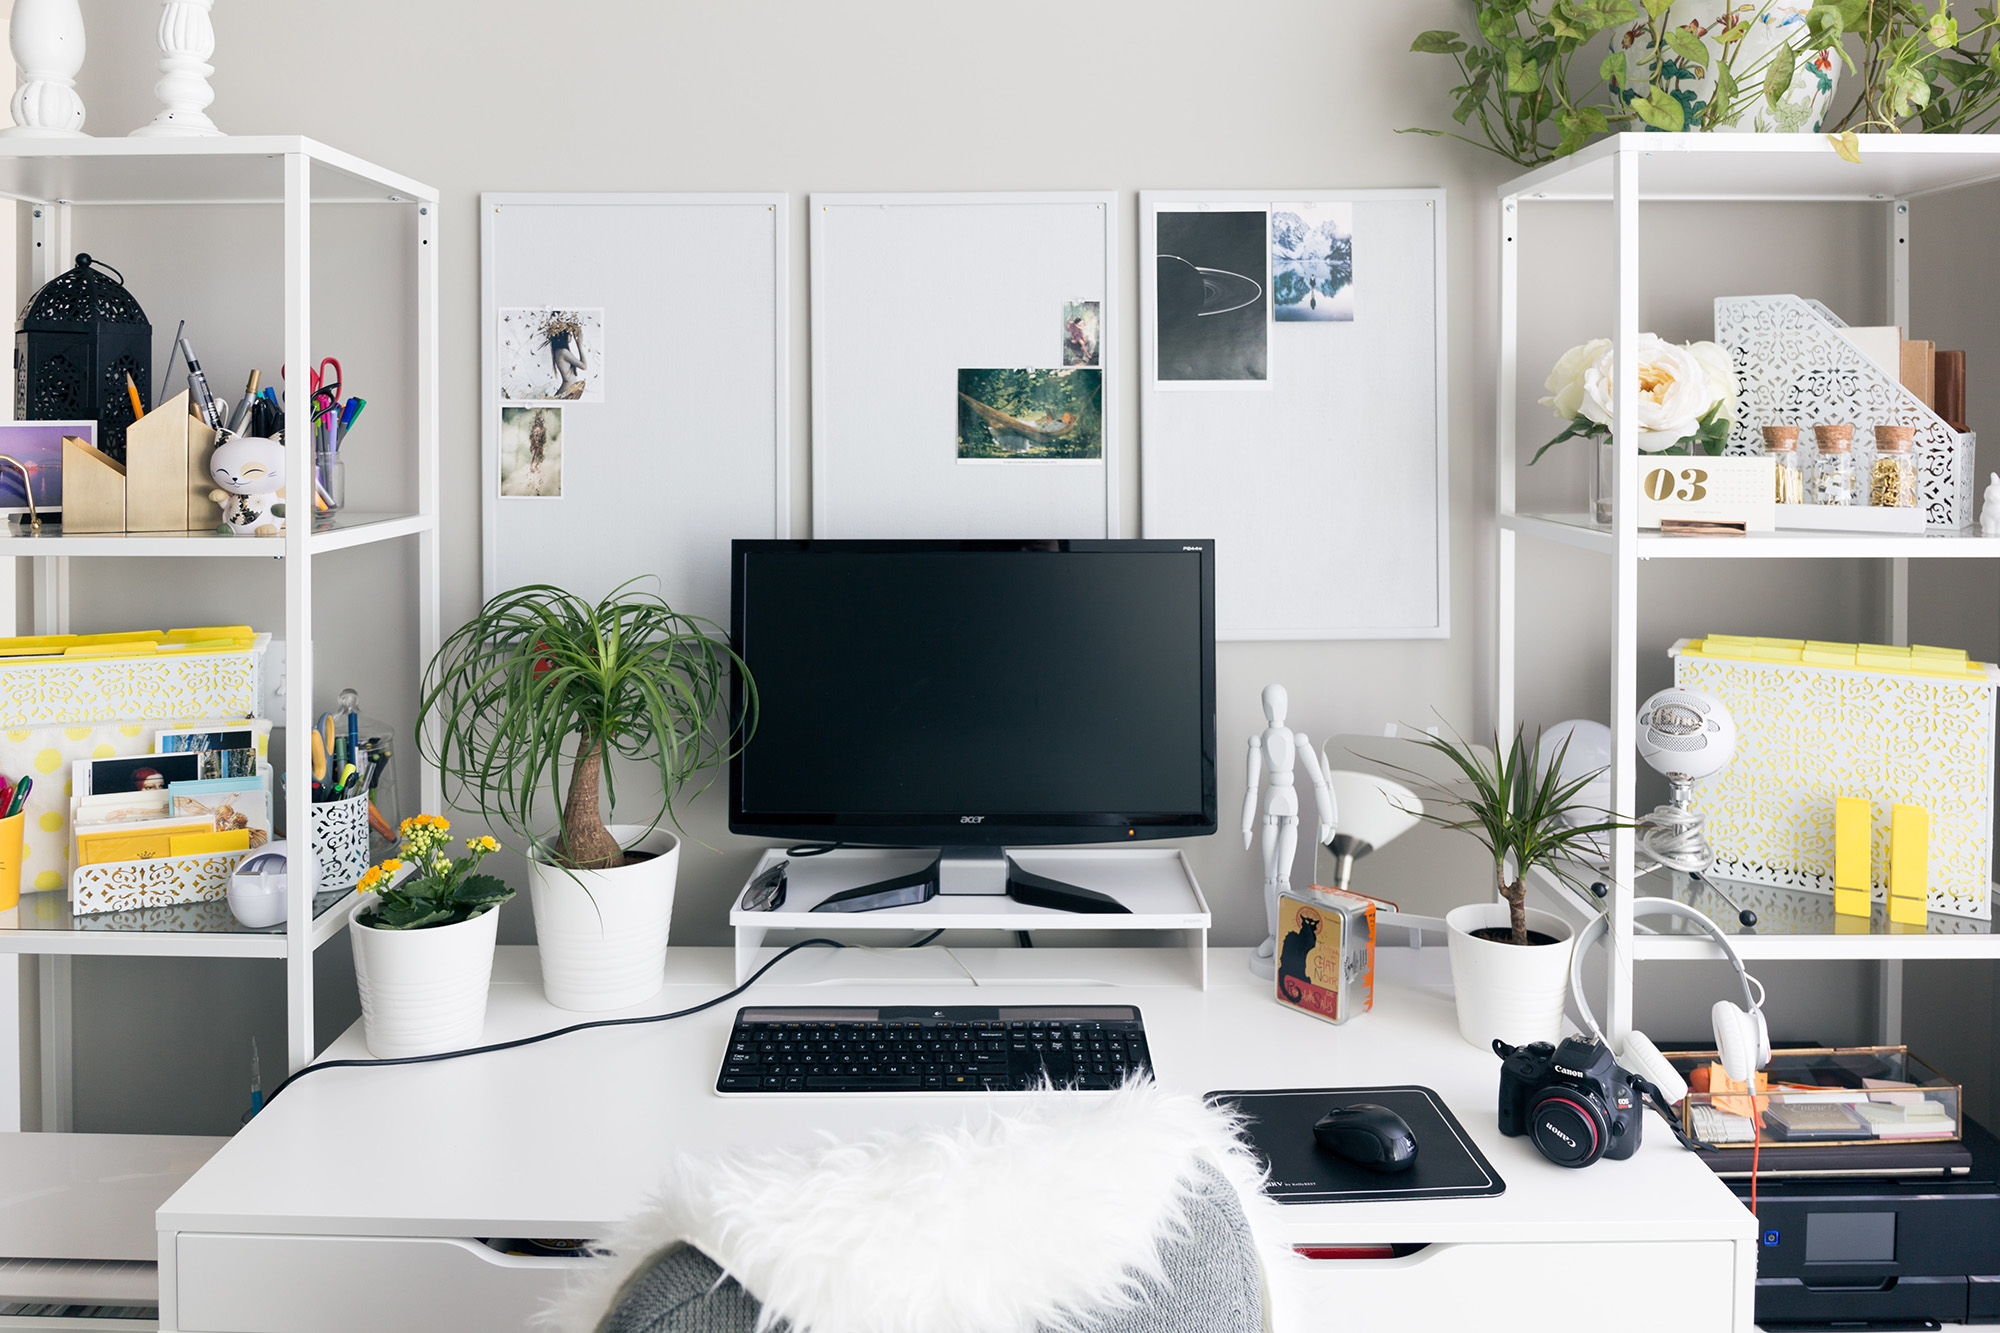 10 Cool, Must-Have Desk Accessories to Help Organize and Inspire